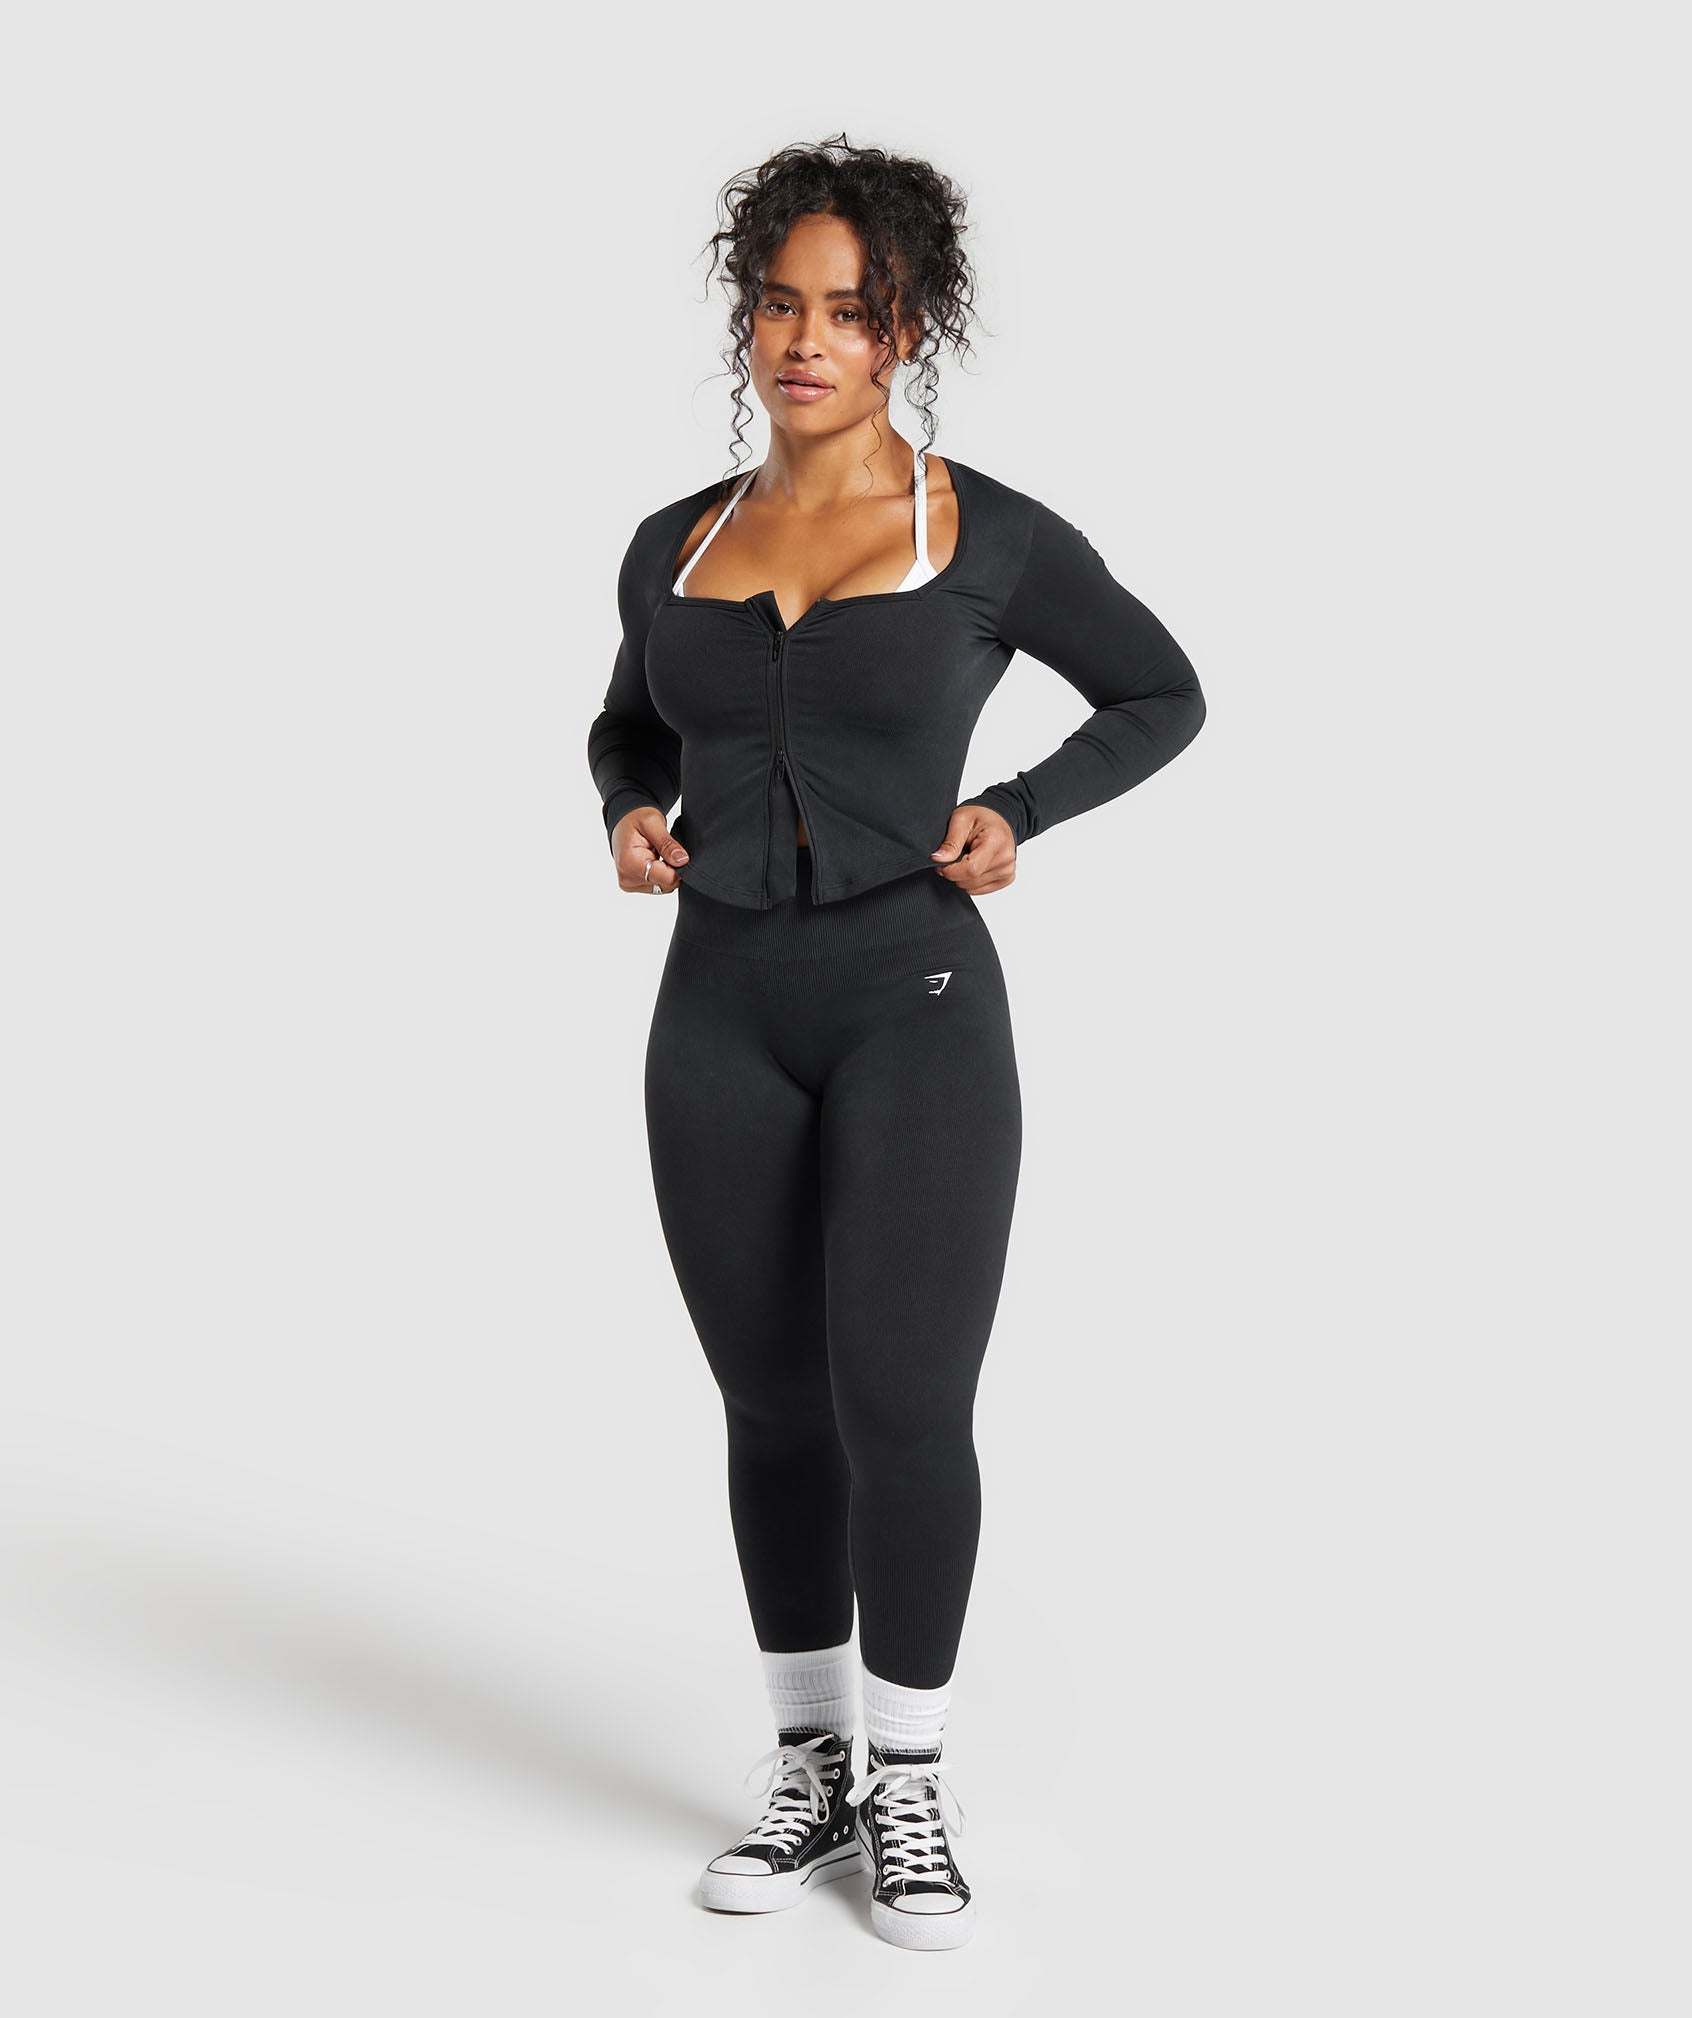 Gains Seamless Zip Up in Black - view 4